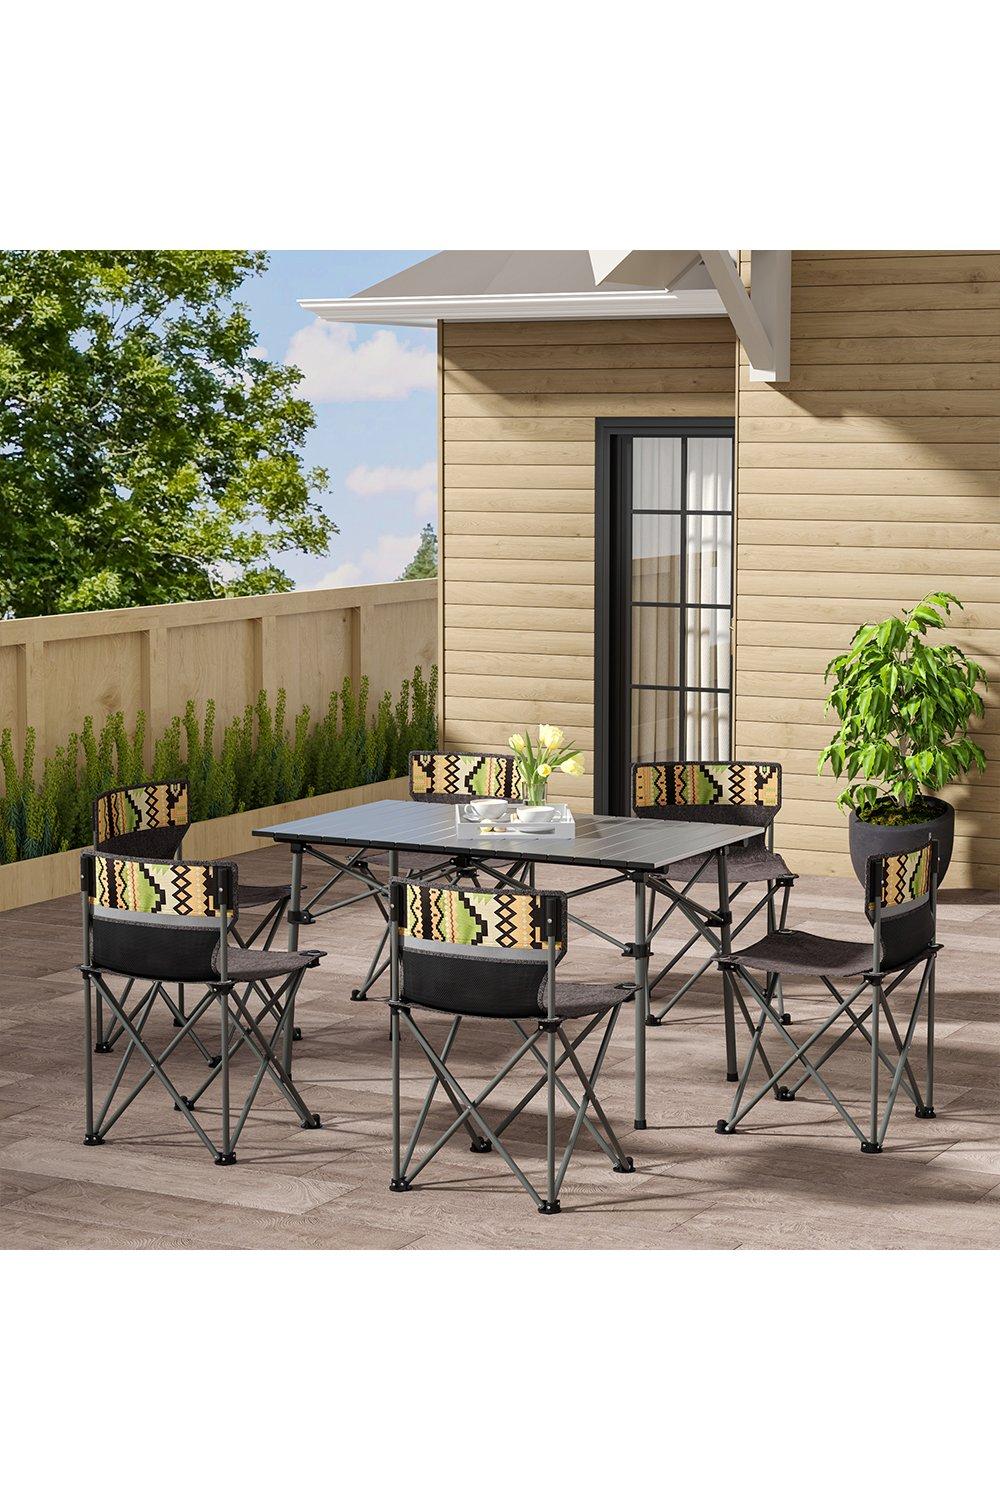 6 Seater Folding Outdoor Camping Dining Table Set with Carrying Bag